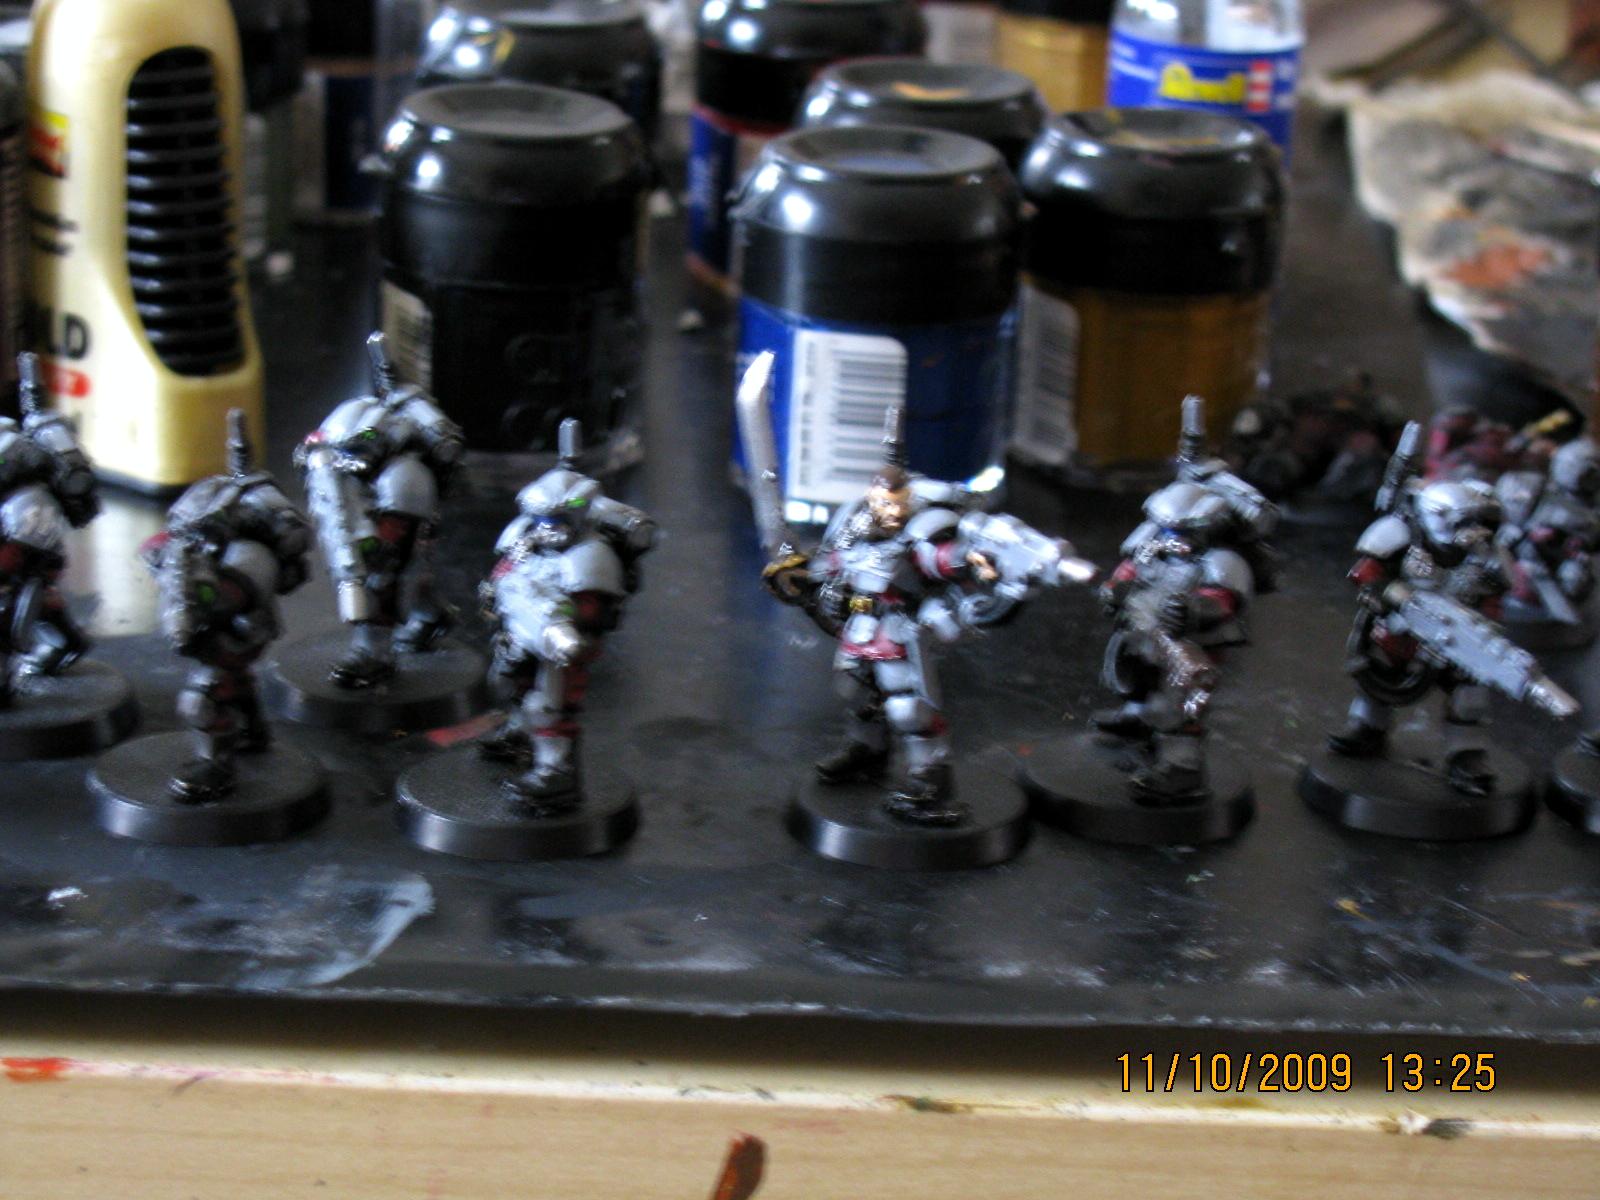 Imperial Guard, wip